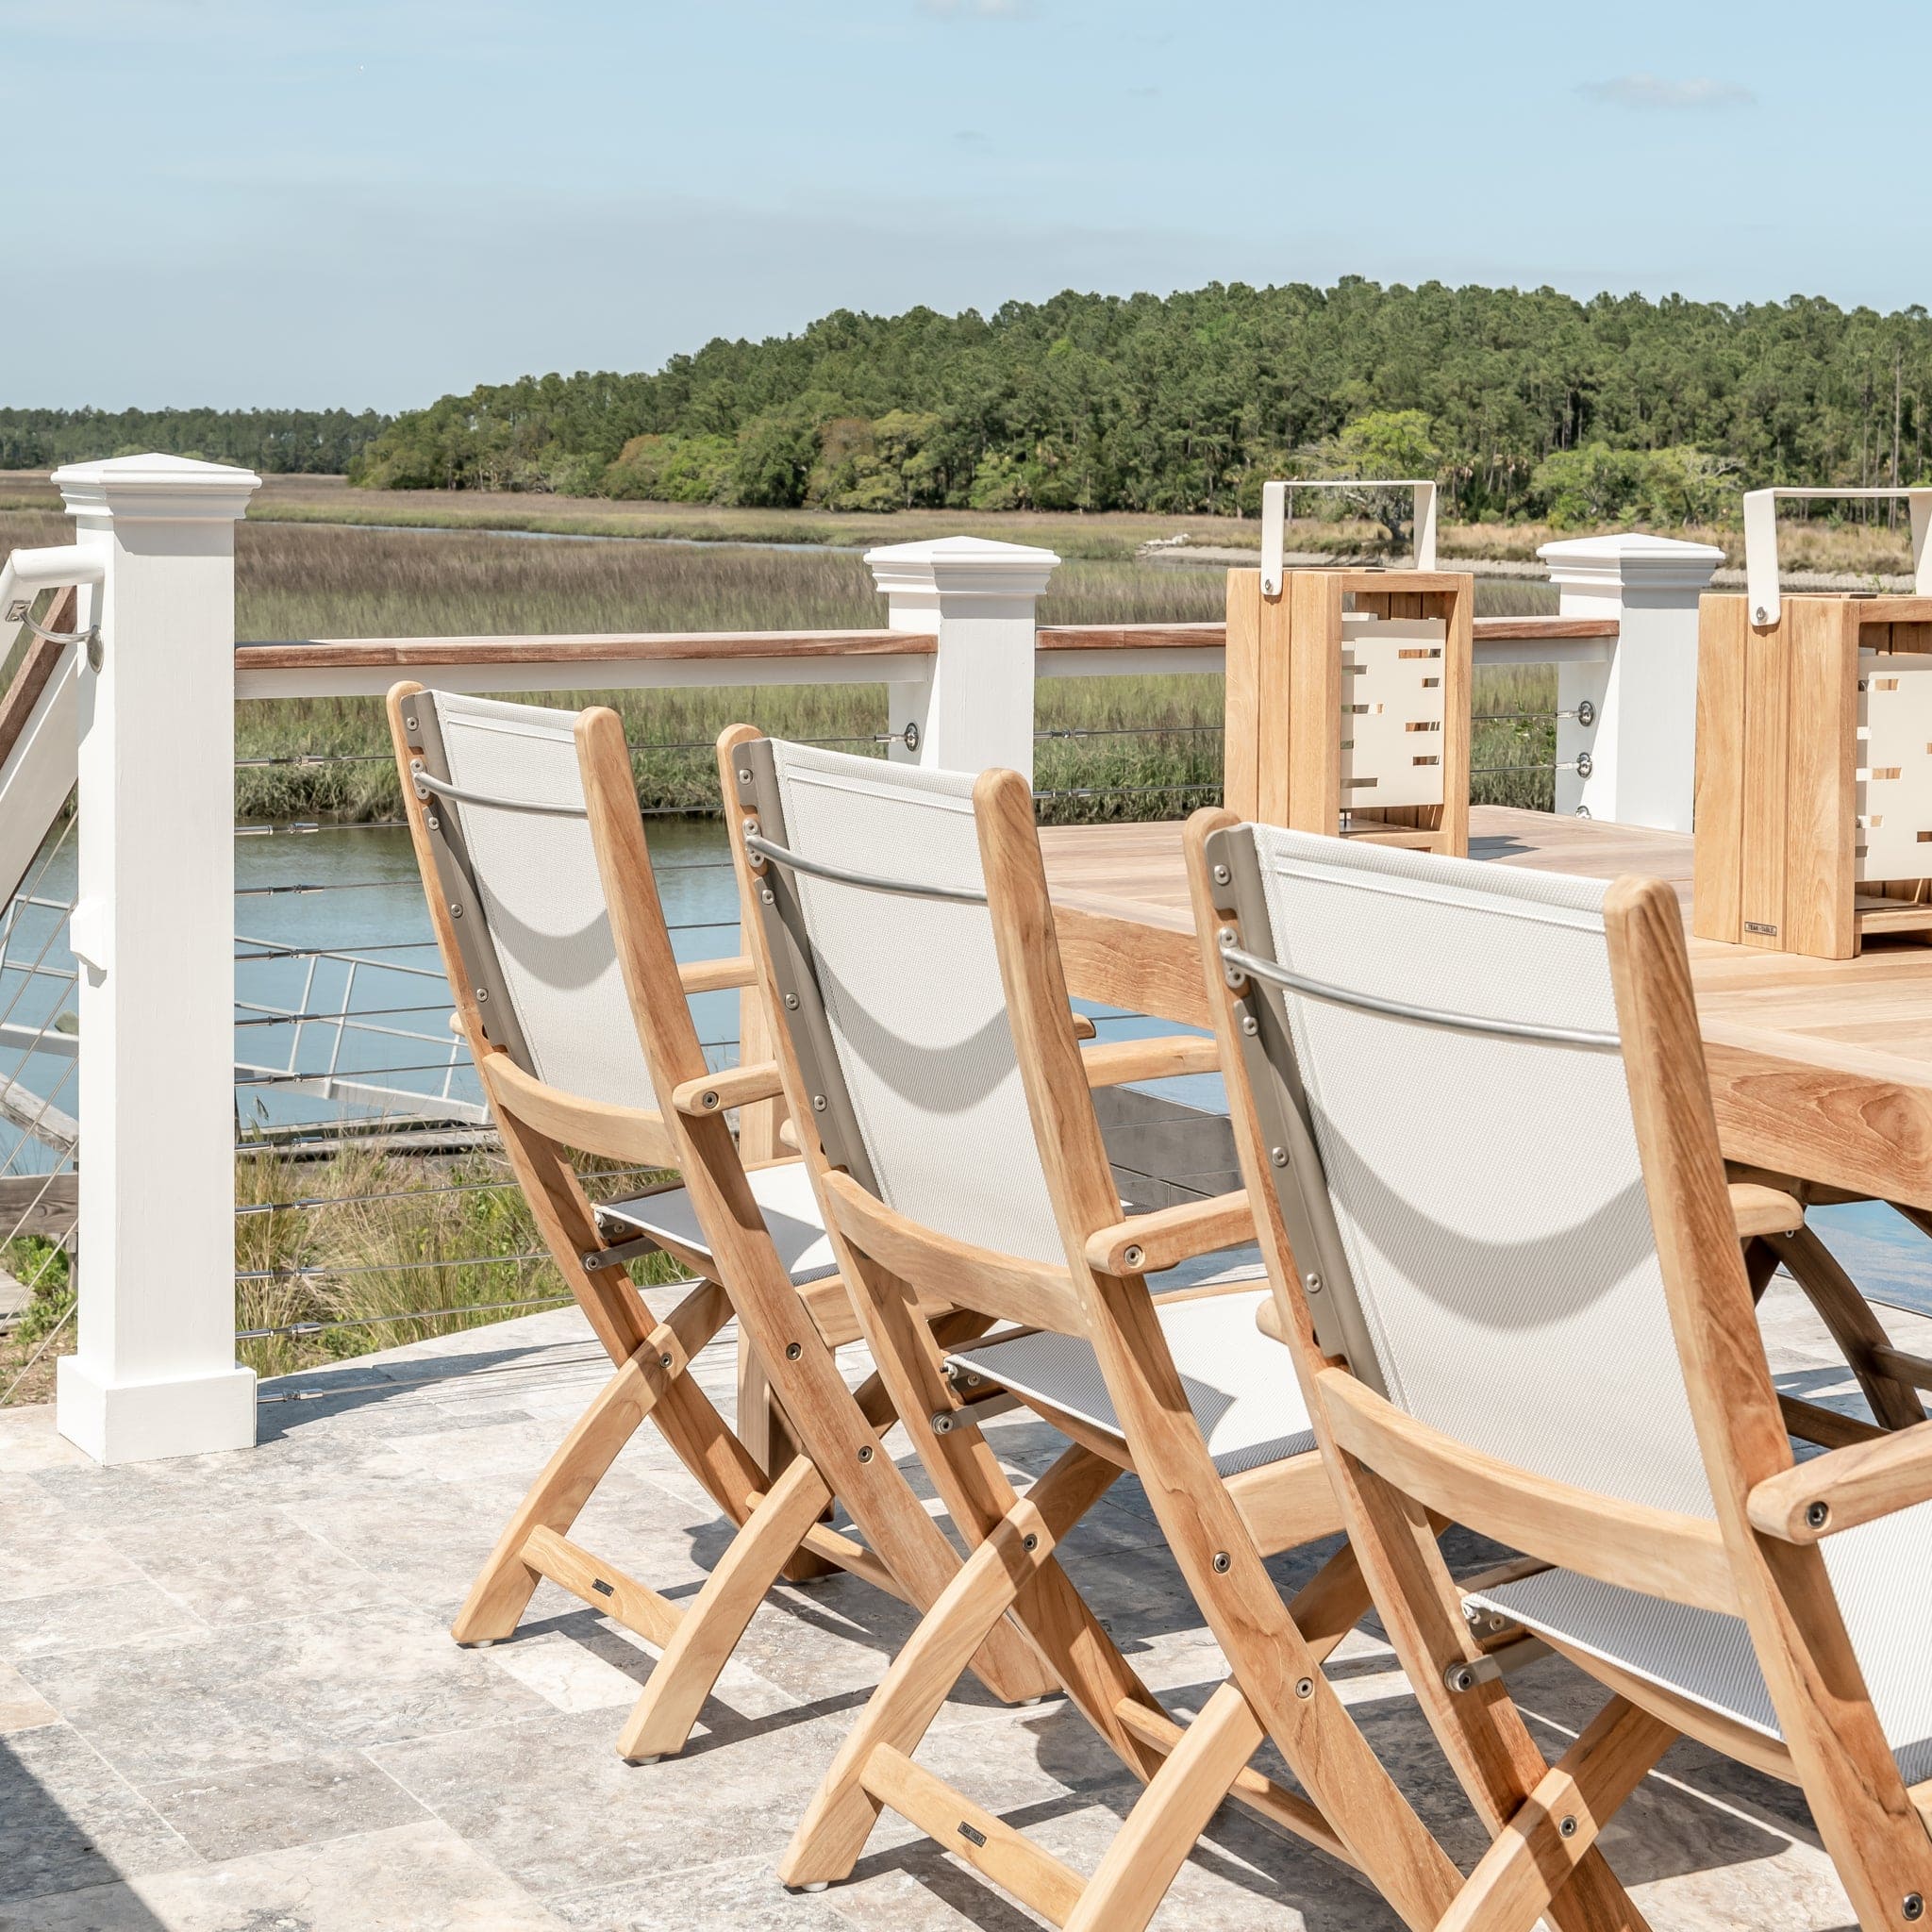 Maintain Your Outdoor Space with a Folding Dining Table and Chairs